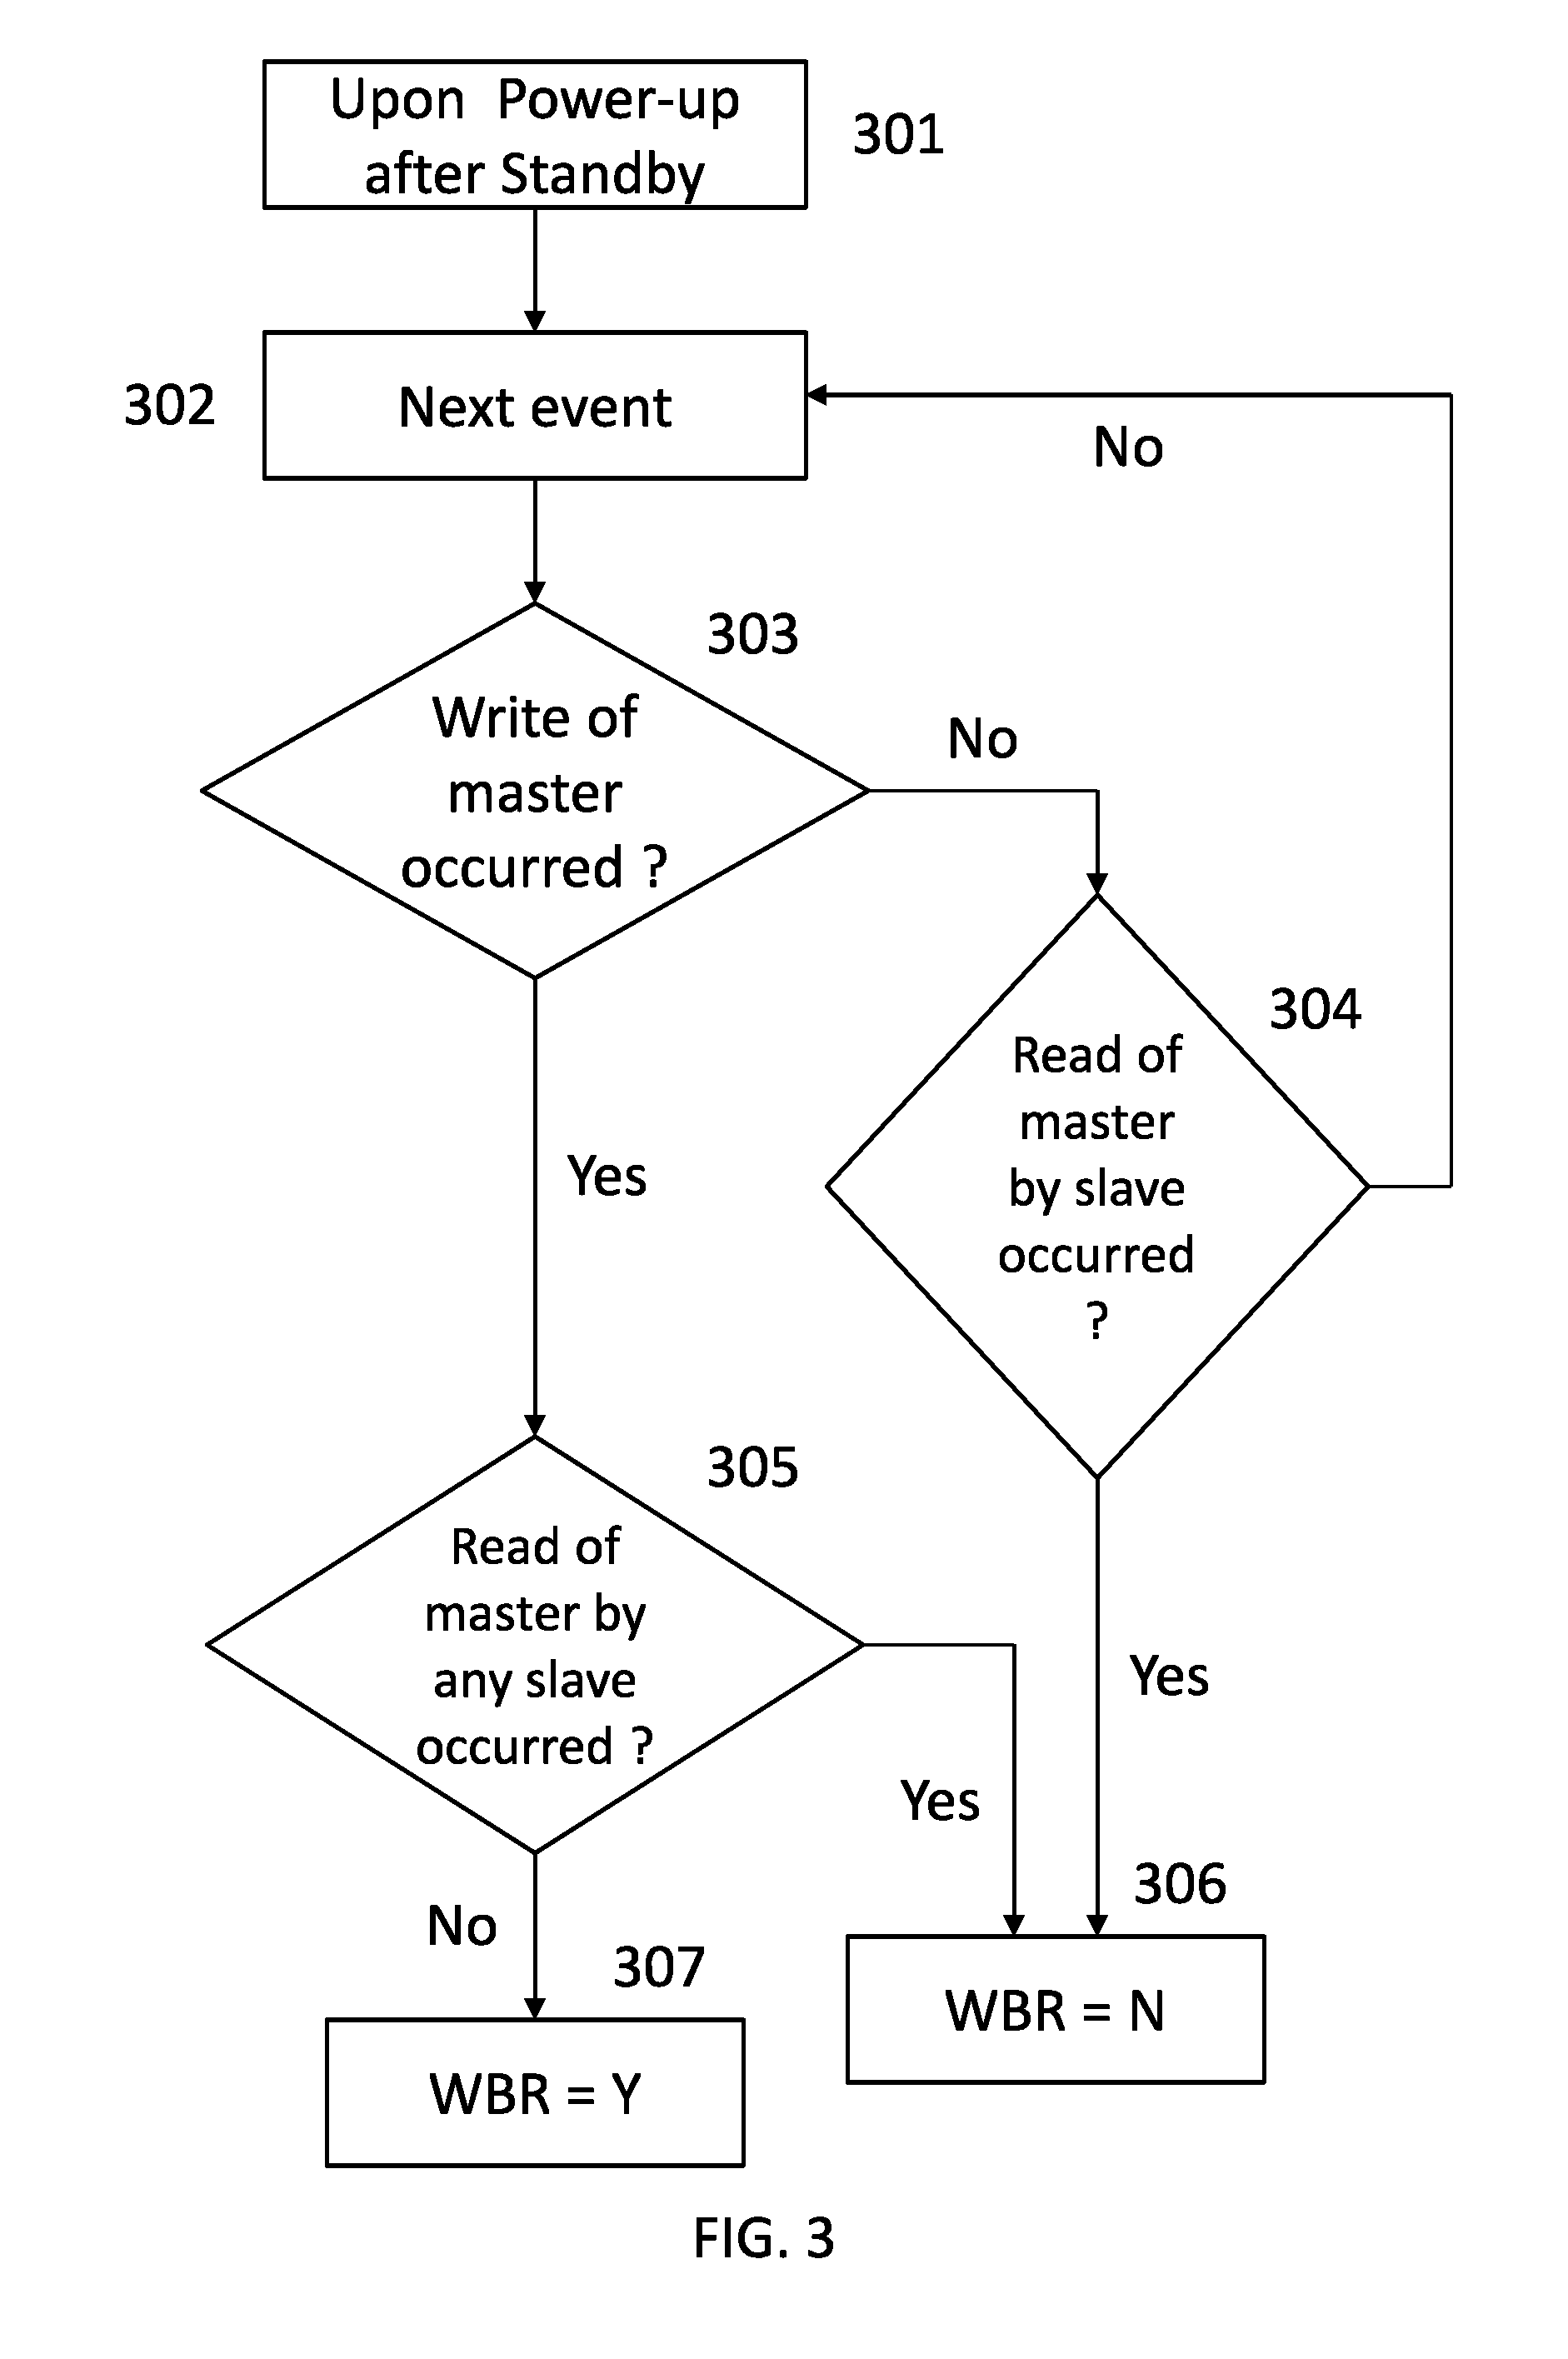 Method for finding non-essential flip flops in a VLSI design that do not require retention in standby mode